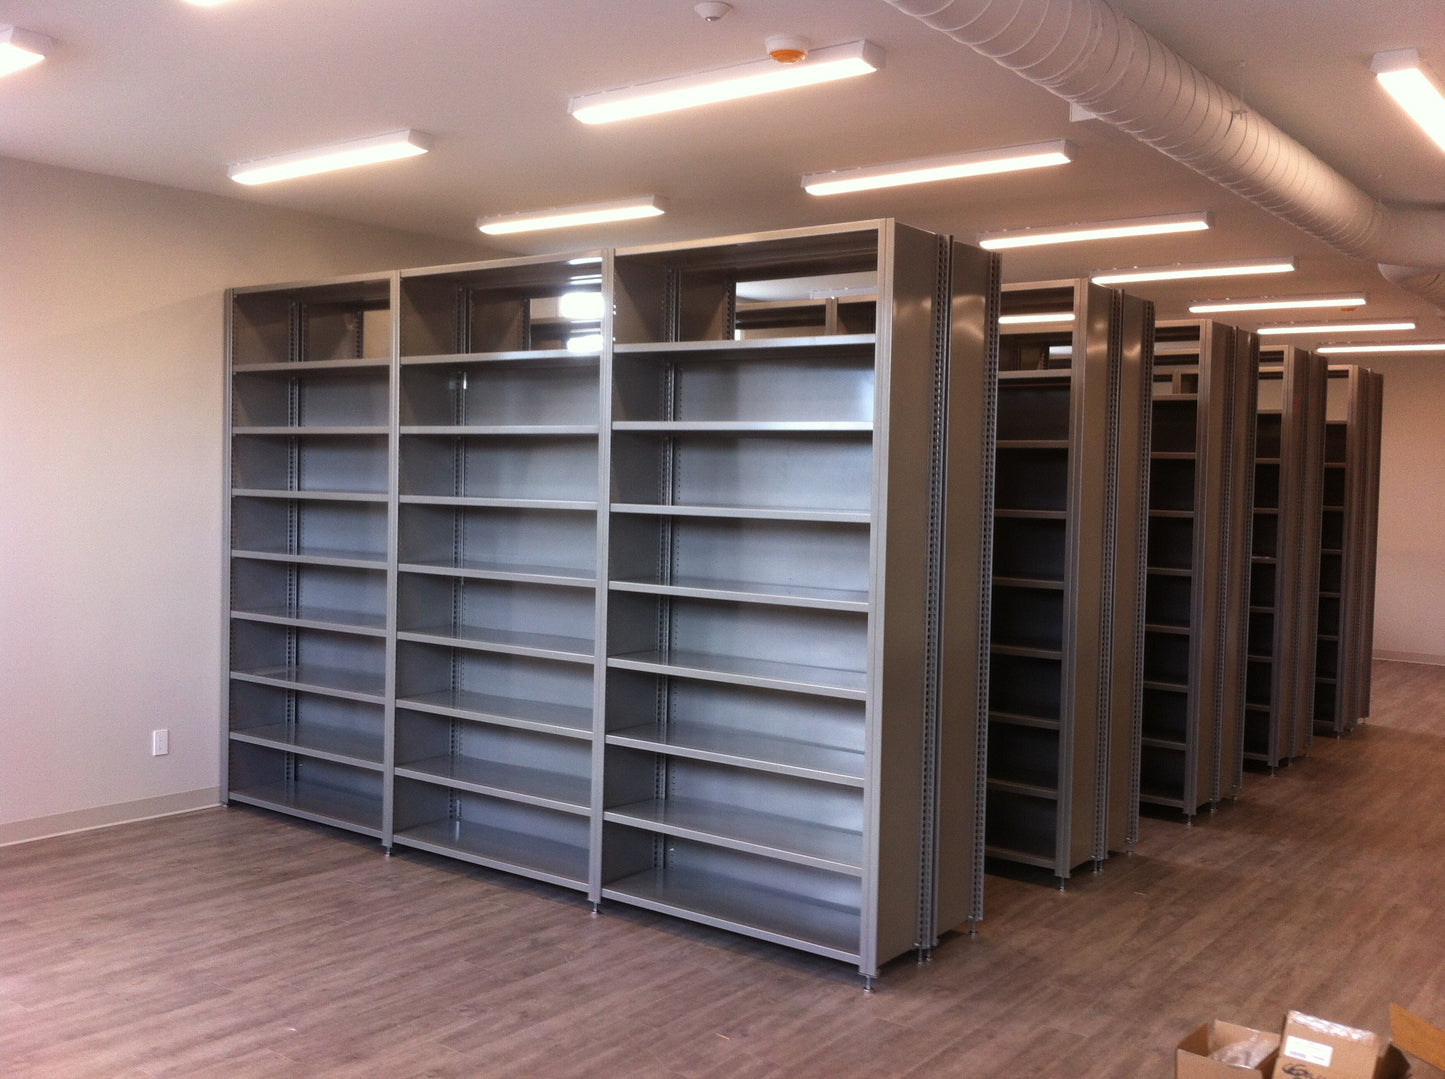 Shelving system 99 height x 36 width x 24 depth | Option: Open / Closed